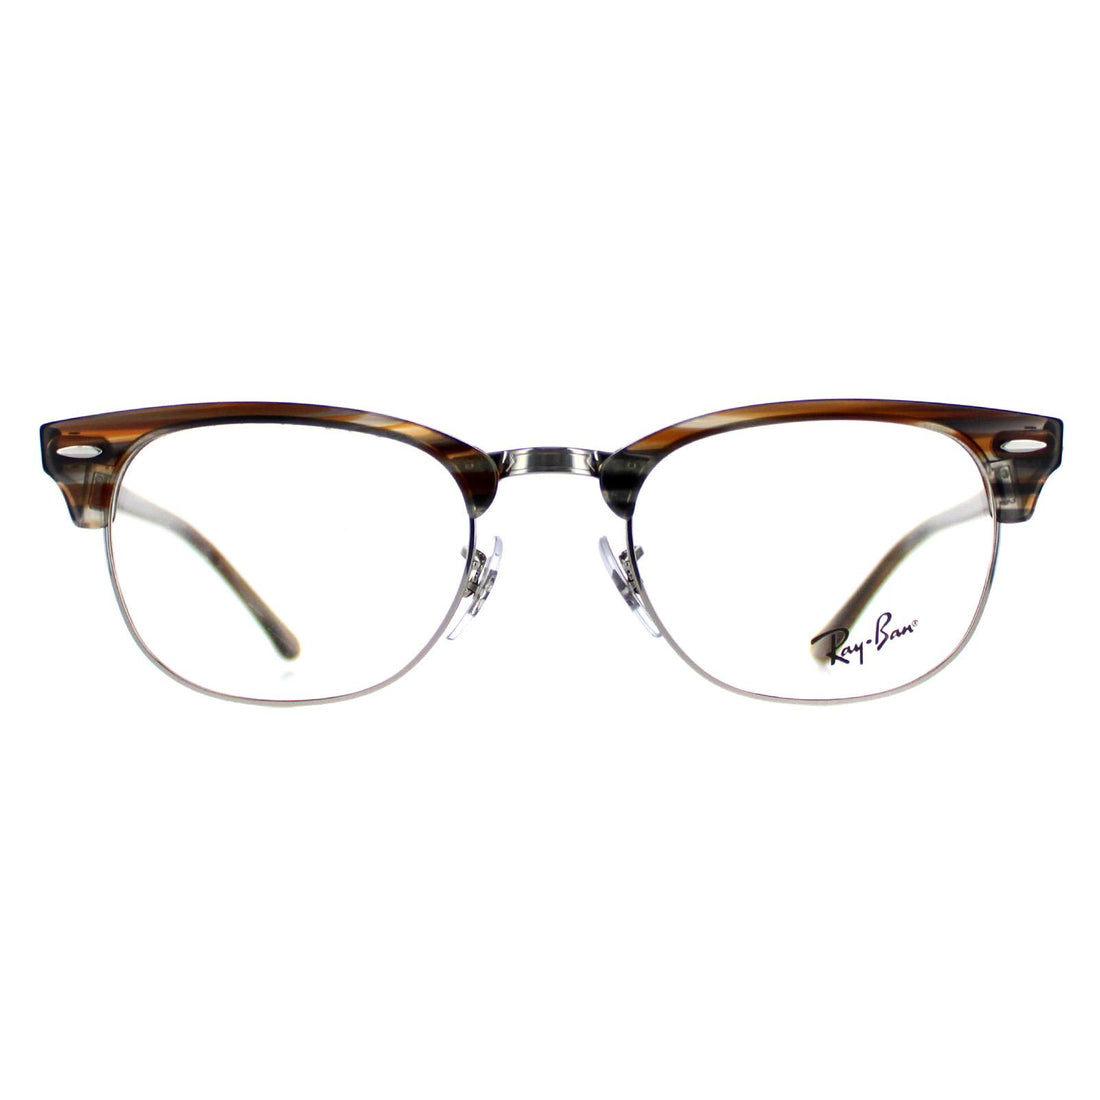 Ray-Ban Glasses Frames RX5154 Clubmaster 5749 Polished Brown Men Women